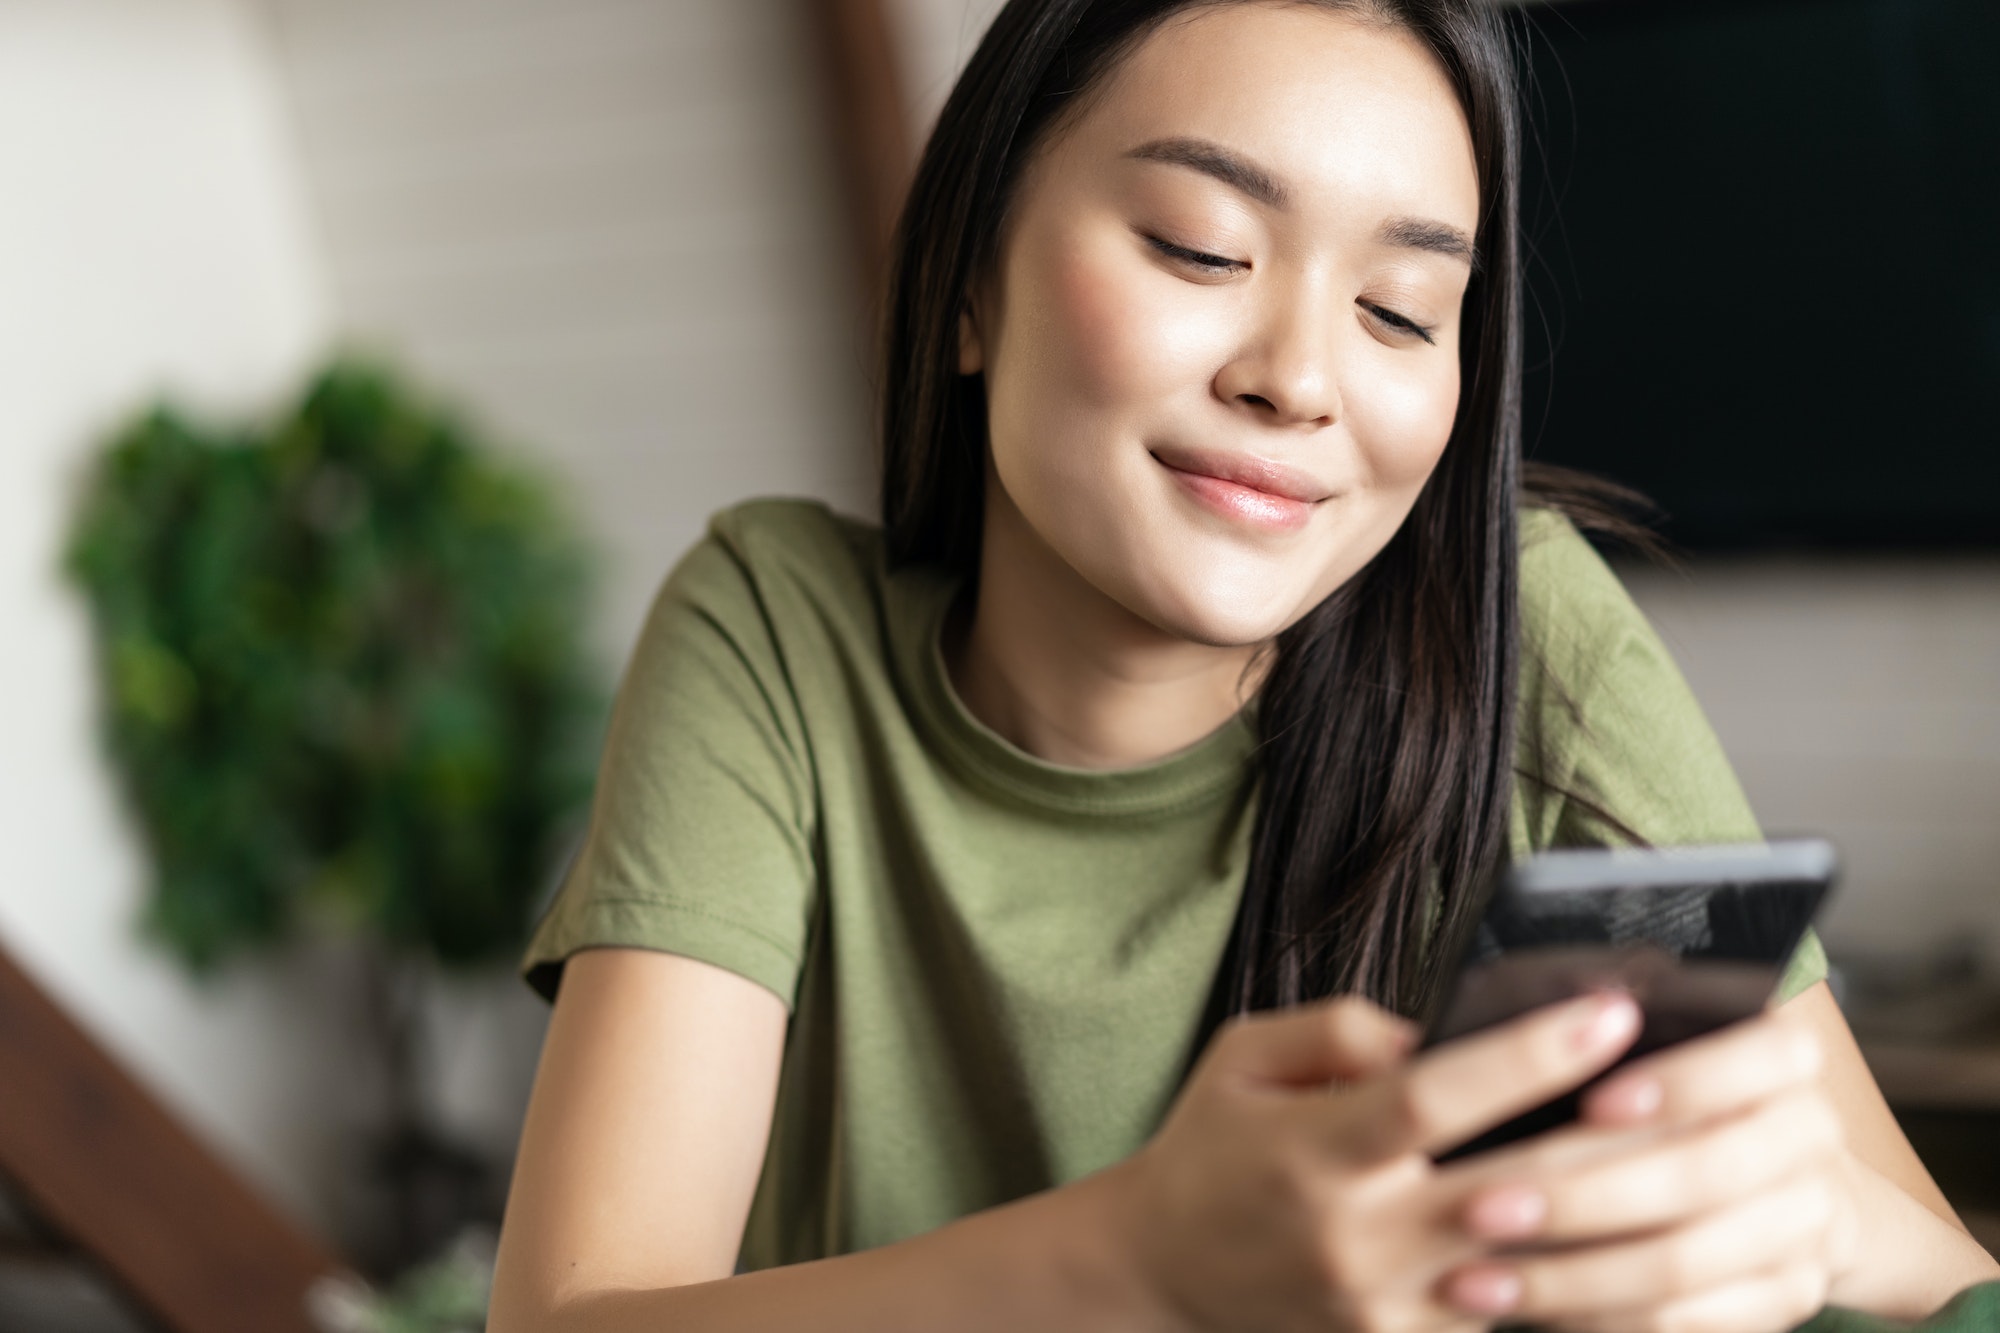 Smiling korean woman looking at mobile phone chat app with dreamy face, sitting at home on couch